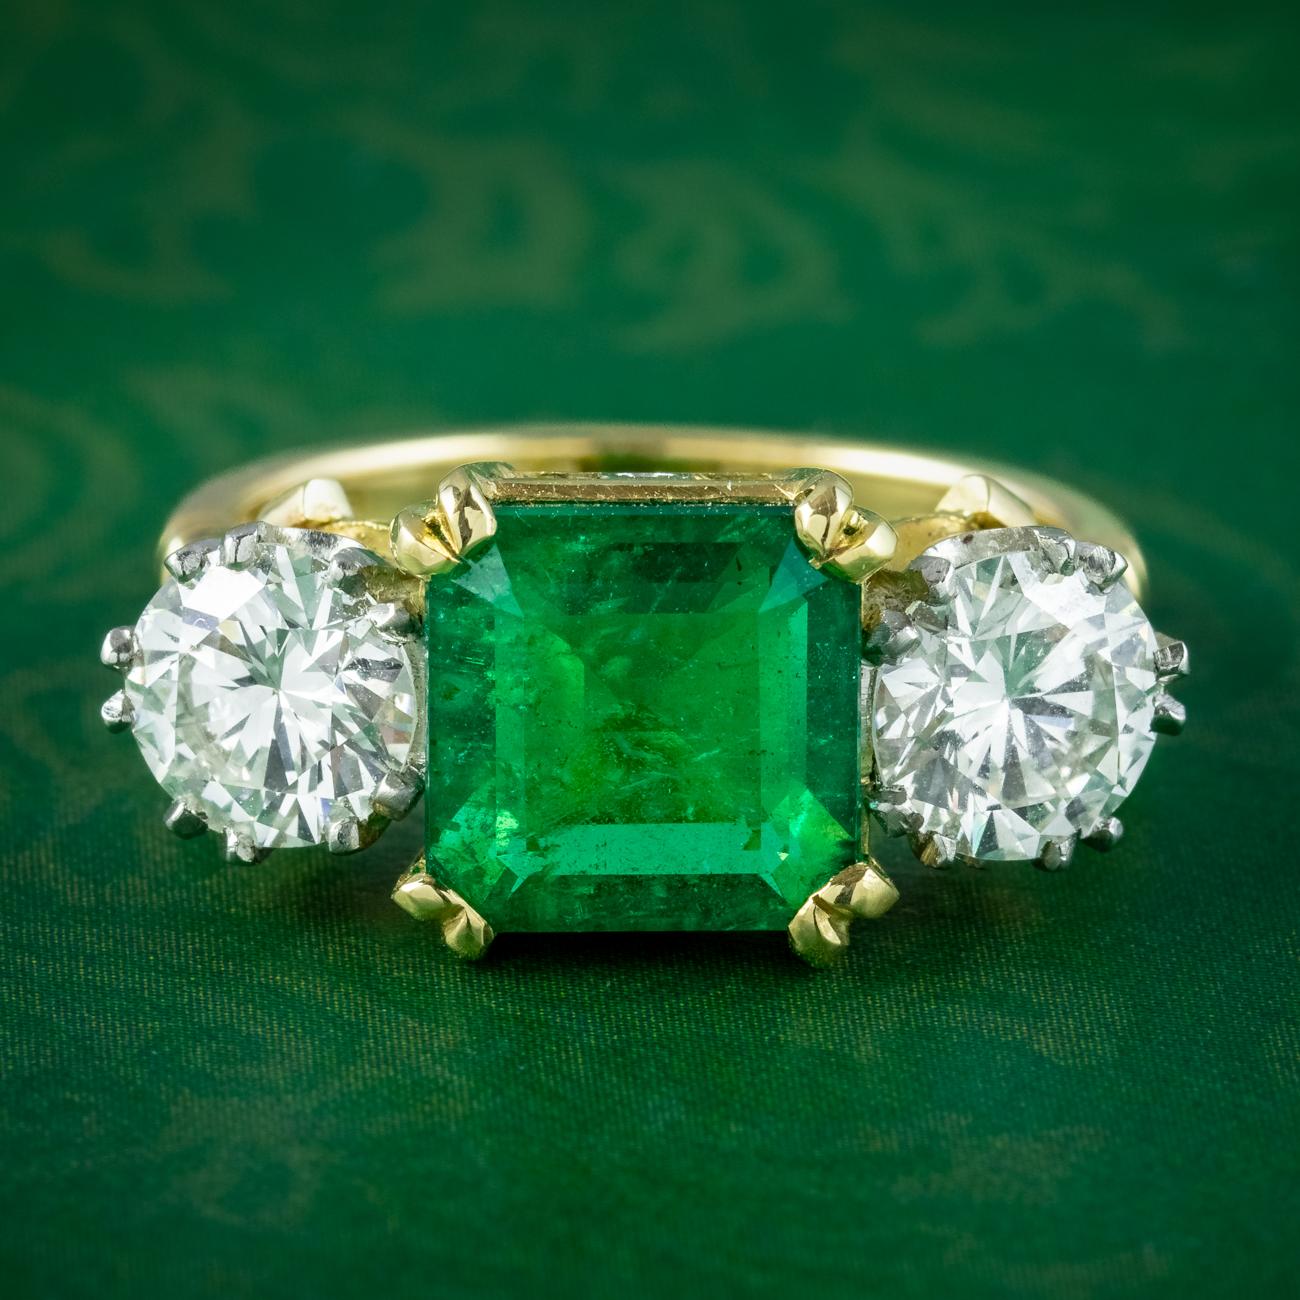 A magnificent Edwardian inspired trilogy ring boasting a gorgeous square step cut emerald in the centre with a vibrant, grassy green hue. It’s accompanied by an E.D.R gem certification which verifies it’s natural and weighs an estimated 3.39